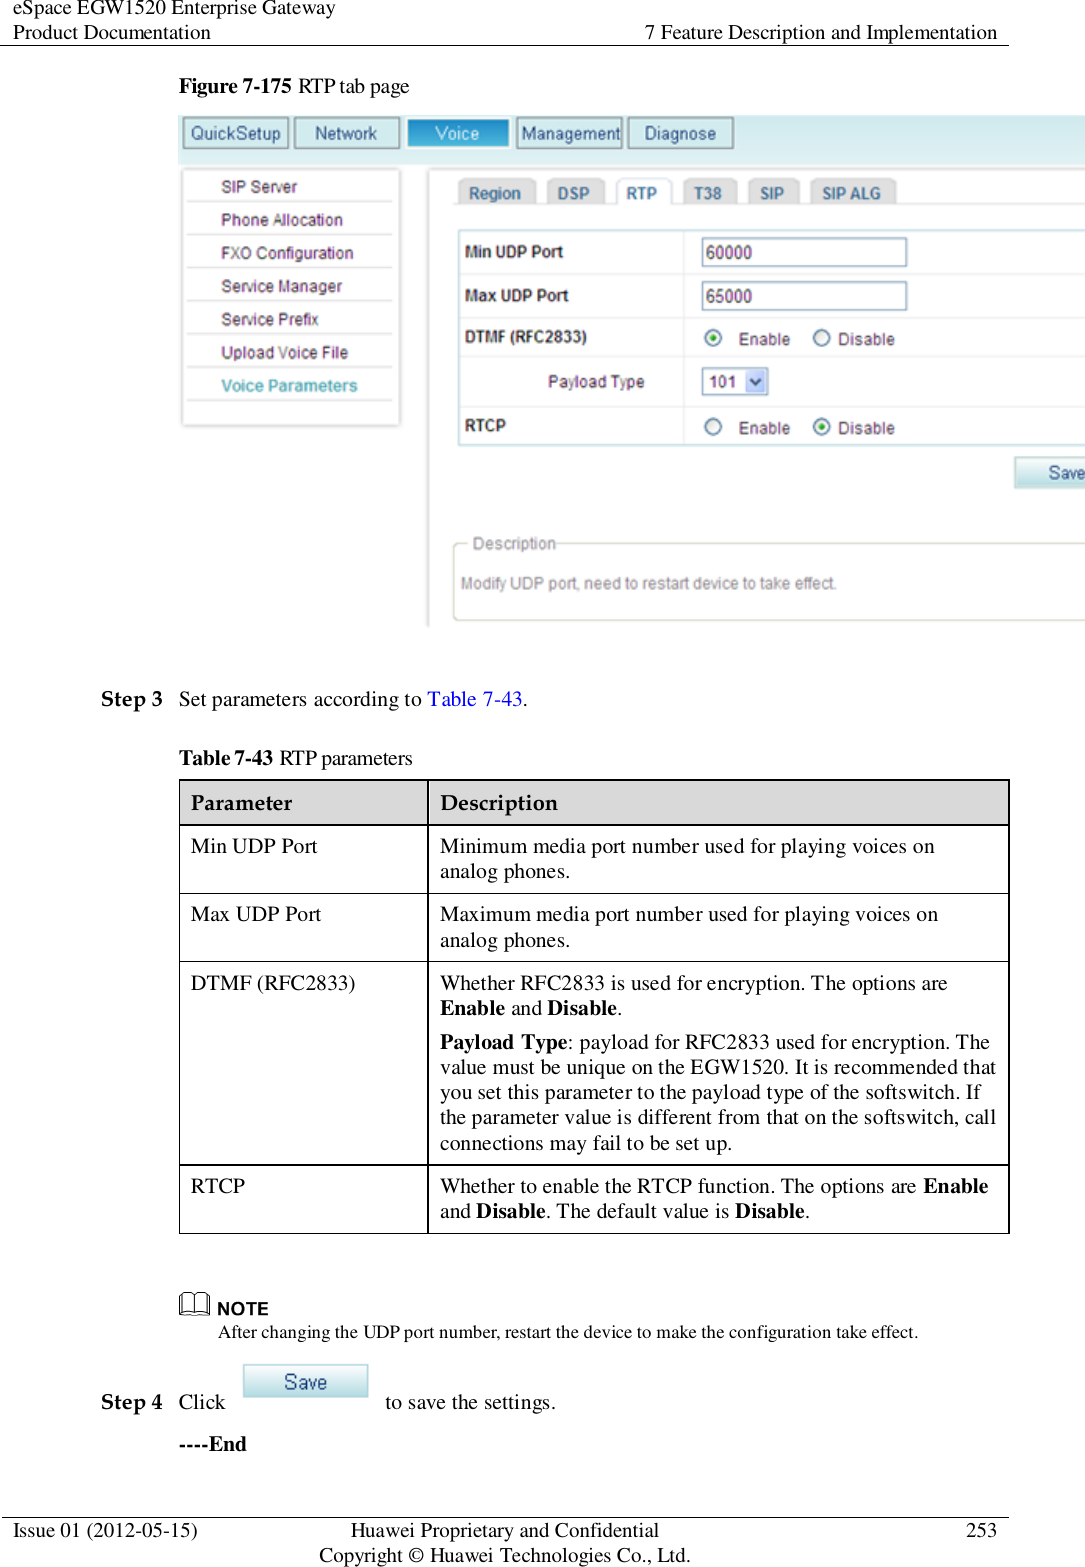 eSpace EGW1520 Enterprise Gateway Product Documentation 7 Feature Description and Implementation  Issue 01 (2012-05-15) Huawei Proprietary and Confidential                                     Copyright © Huawei Technologies Co., Ltd. 253  Figure 7-175 RTP tab page   Step 3 Set parameters according to Table 7-43. Table 7-43 RTP parameters Parameter Description Min UDP Port Minimum media port number used for playing voices on analog phones. Max UDP Port Maximum media port number used for playing voices on analog phones. DTMF (RFC2833) Whether RFC2833 is used for encryption. The options are Enable and Disable. Payload Type: payload for RFC2833 used for encryption. The value must be unique on the EGW1520. It is recommended that you set this parameter to the payload type of the softswitch. If the parameter value is different from that on the softswitch, call connections may fail to be set up. RTCP Whether to enable the RTCP function. The options are Enable and Disable. The default value is Disable.   After changing the UDP port number, restart the device to make the configuration take effect. Step 4 Click    to save the settings. ----End 